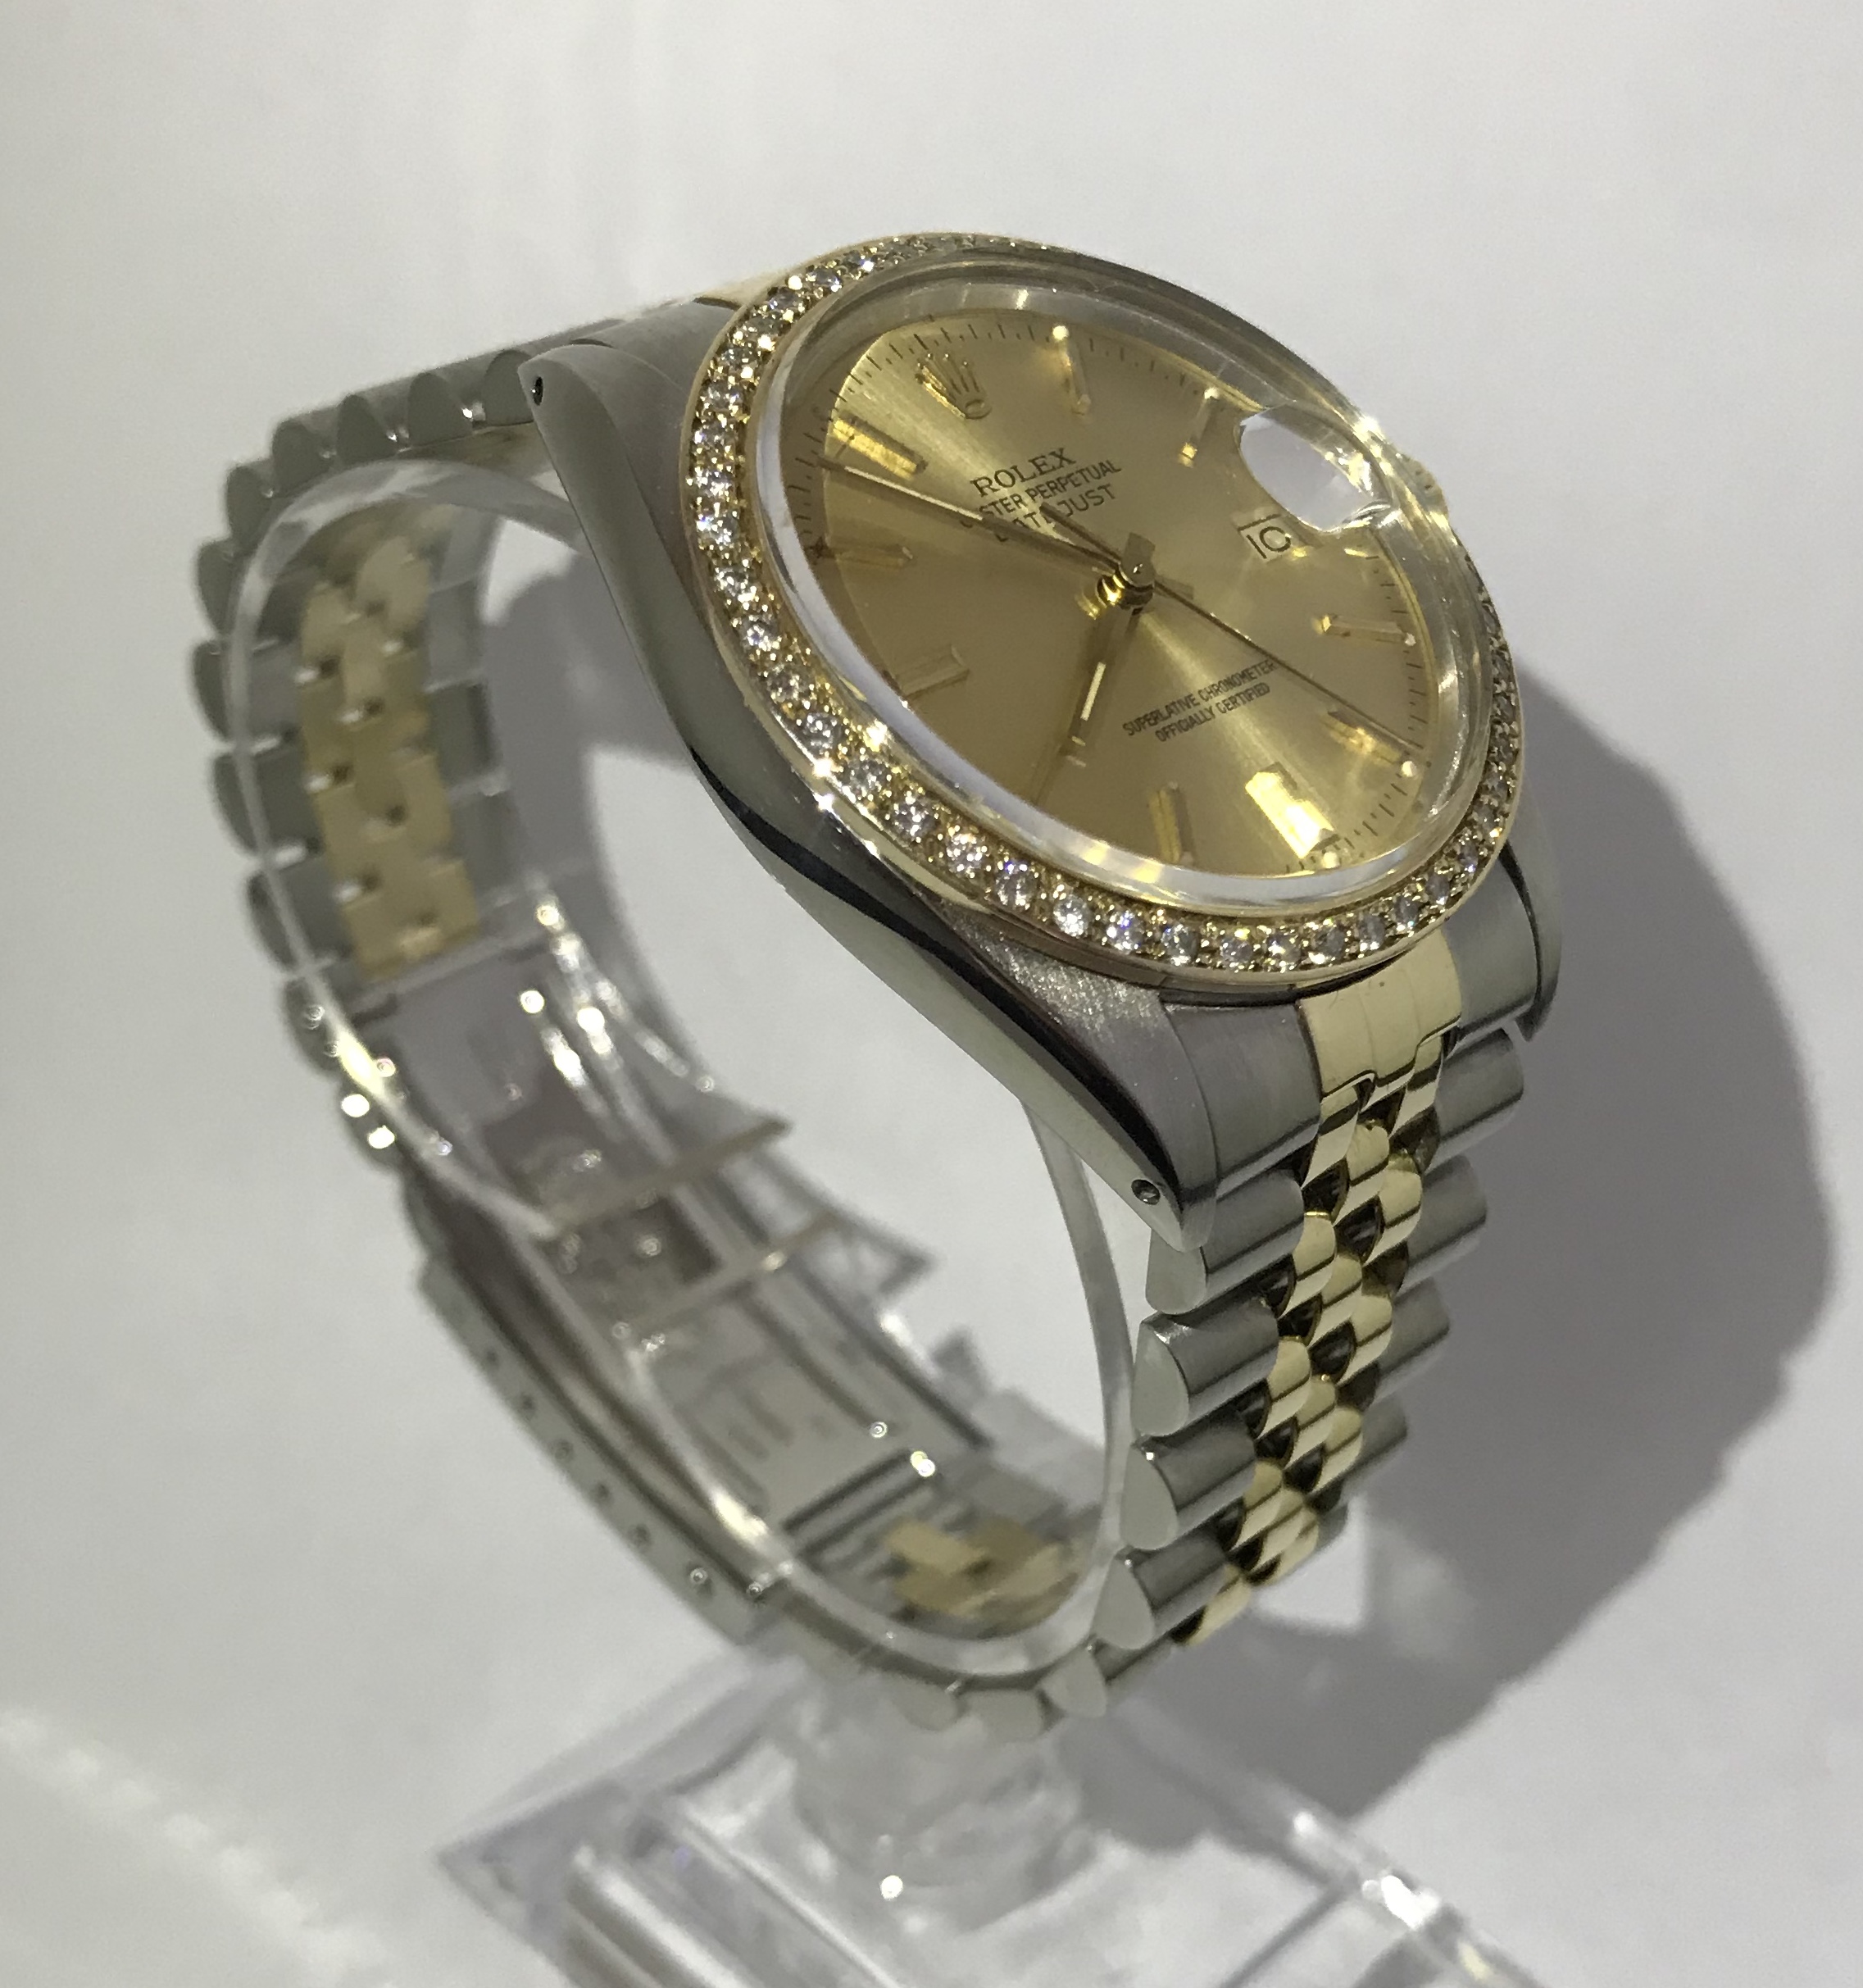 Gents Rolex Datejust 16013 18k Gold & Stainless Steel & Diamond - Image 3 of 8